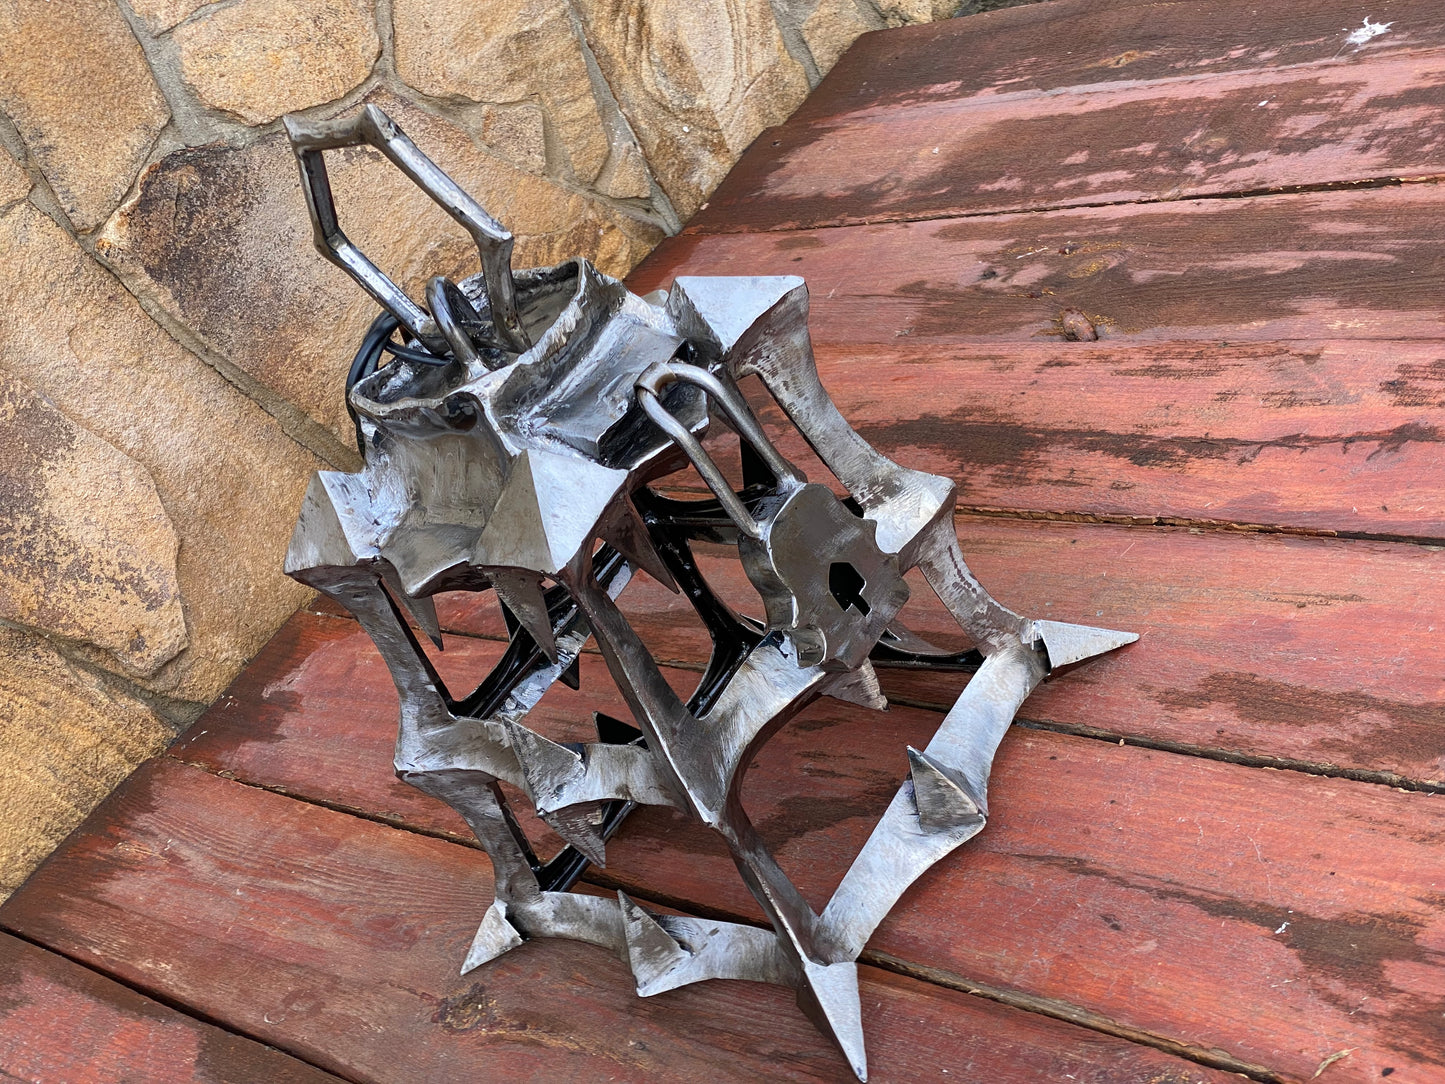 Ceiling lamp, medieval, sconce, wall sconce, Gothic lamp, Christmas, birthday, fairy lamp, wow gift, iron gift, steel gift, light fixture